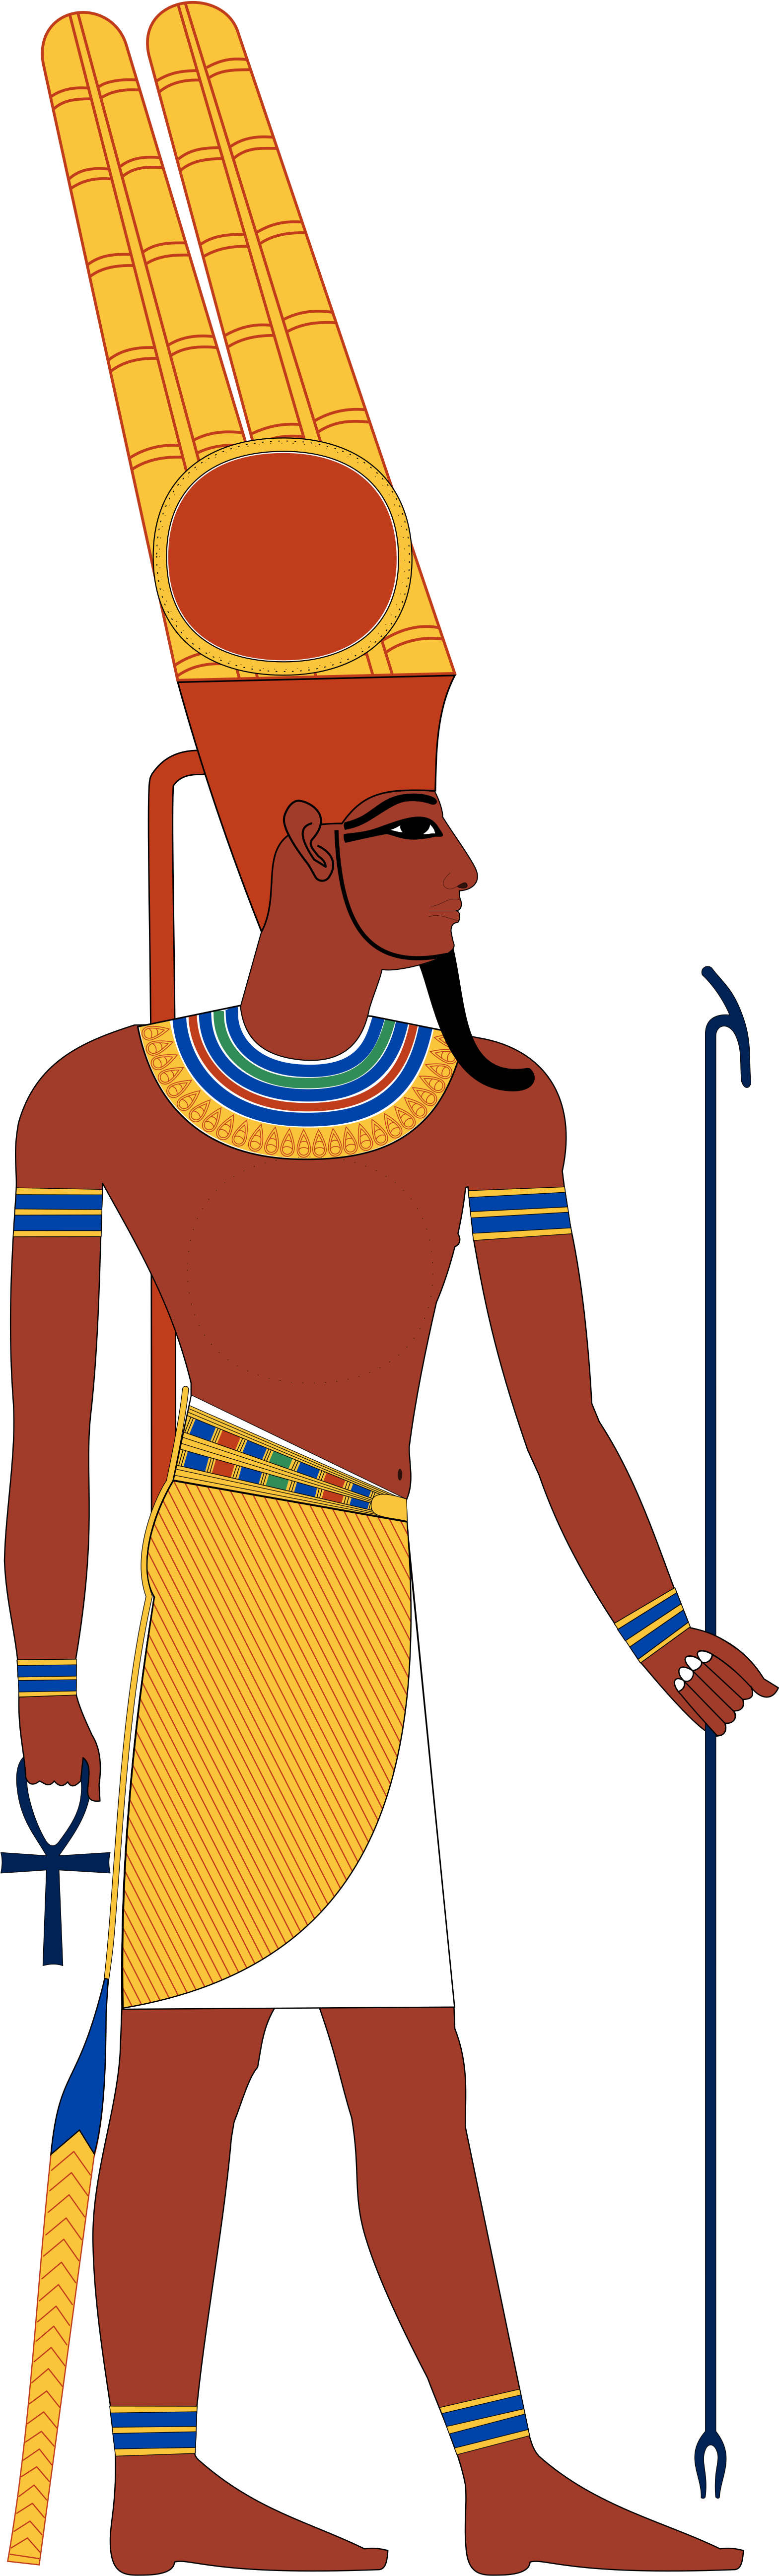 Open - Ancient Egyptian God Amun - Free Transparent PNG Download - PNGkey